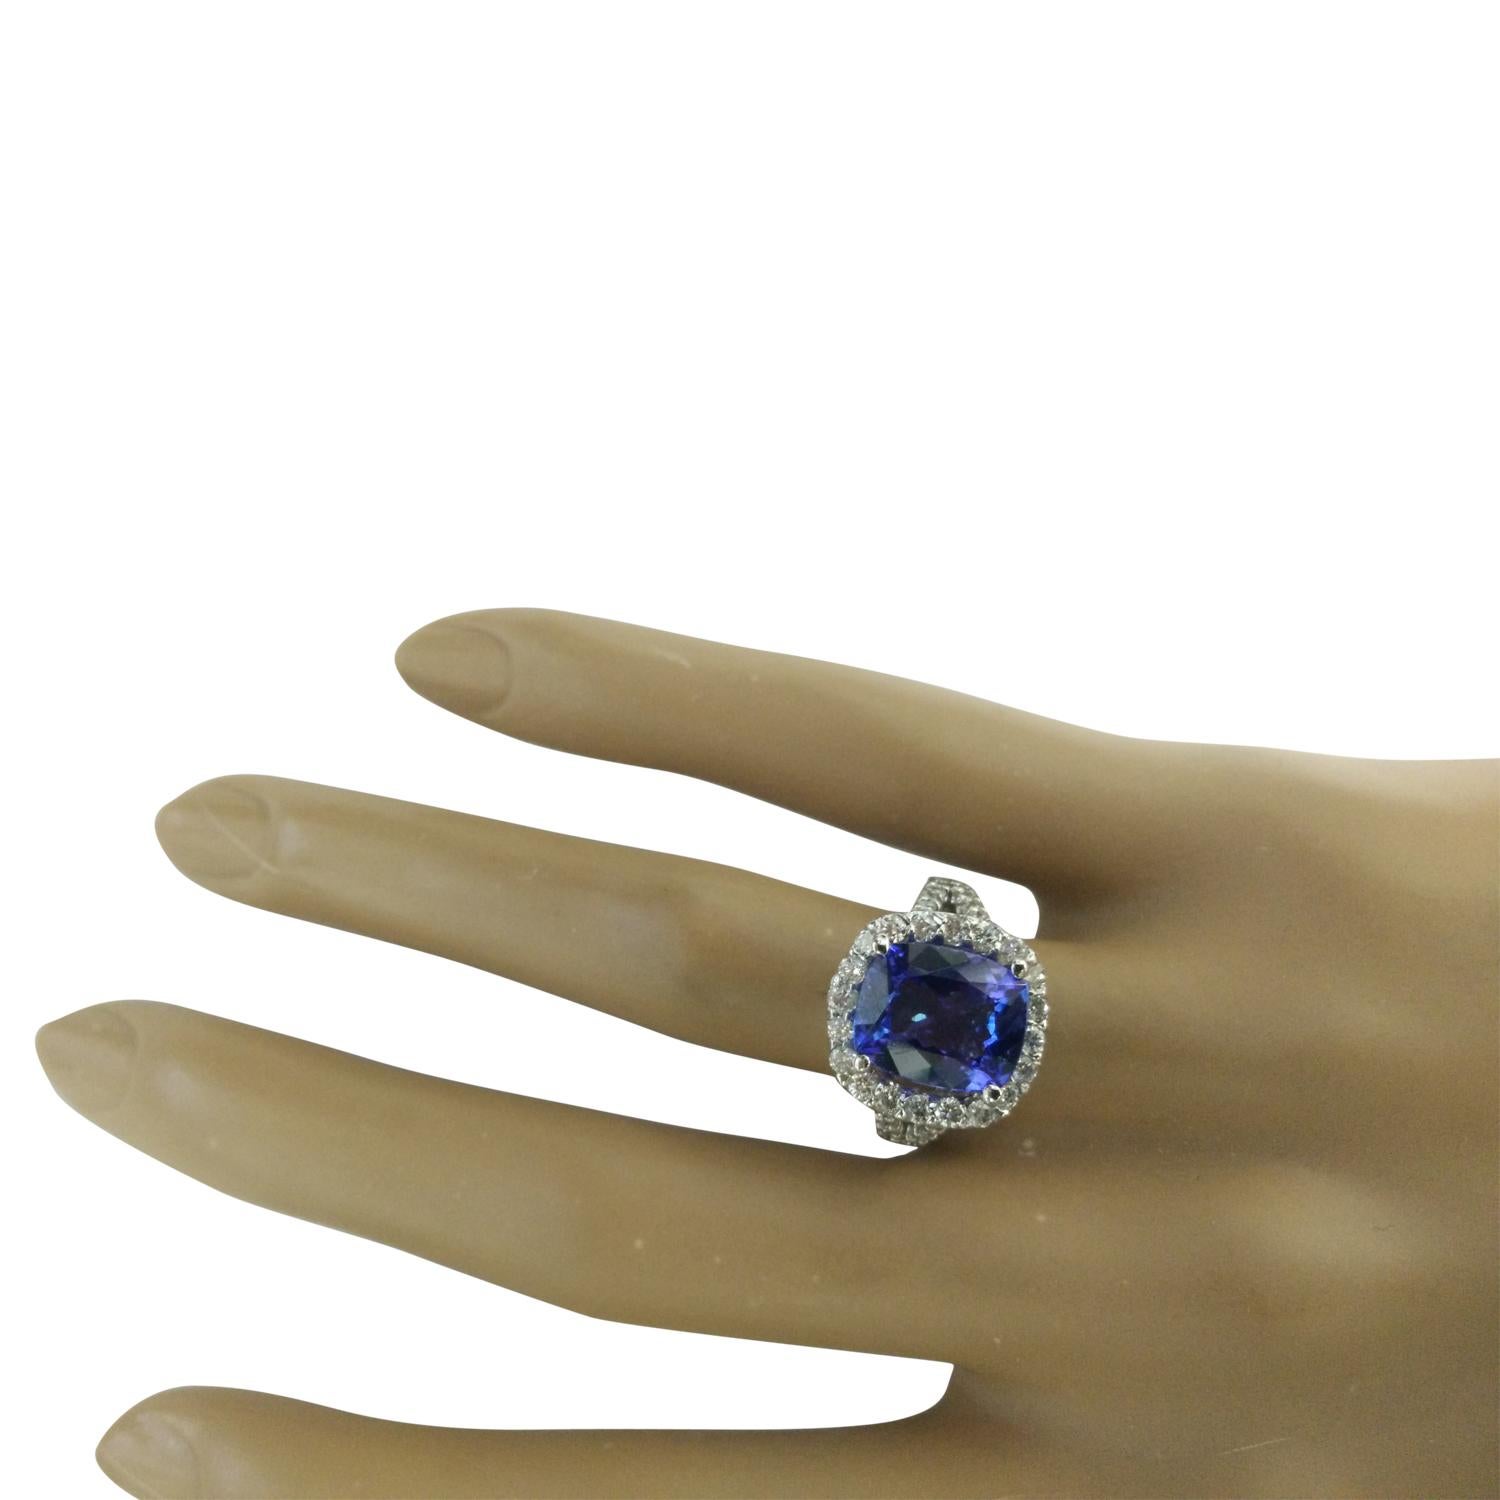 5.09 Carat Natural Tanzanite 14 Karat Solid White Gold Diamond Ring
Stamped: 14K 
Total Ring Weight: 5.8 Grams 
Tanzanite Weight: 4.00 Carat (11.00x9.00 Millimeters)  
Diamond Weight: 1.09 Carat (F-G Color, VS2-SI1 Clarity )
Quantity: 56
Face